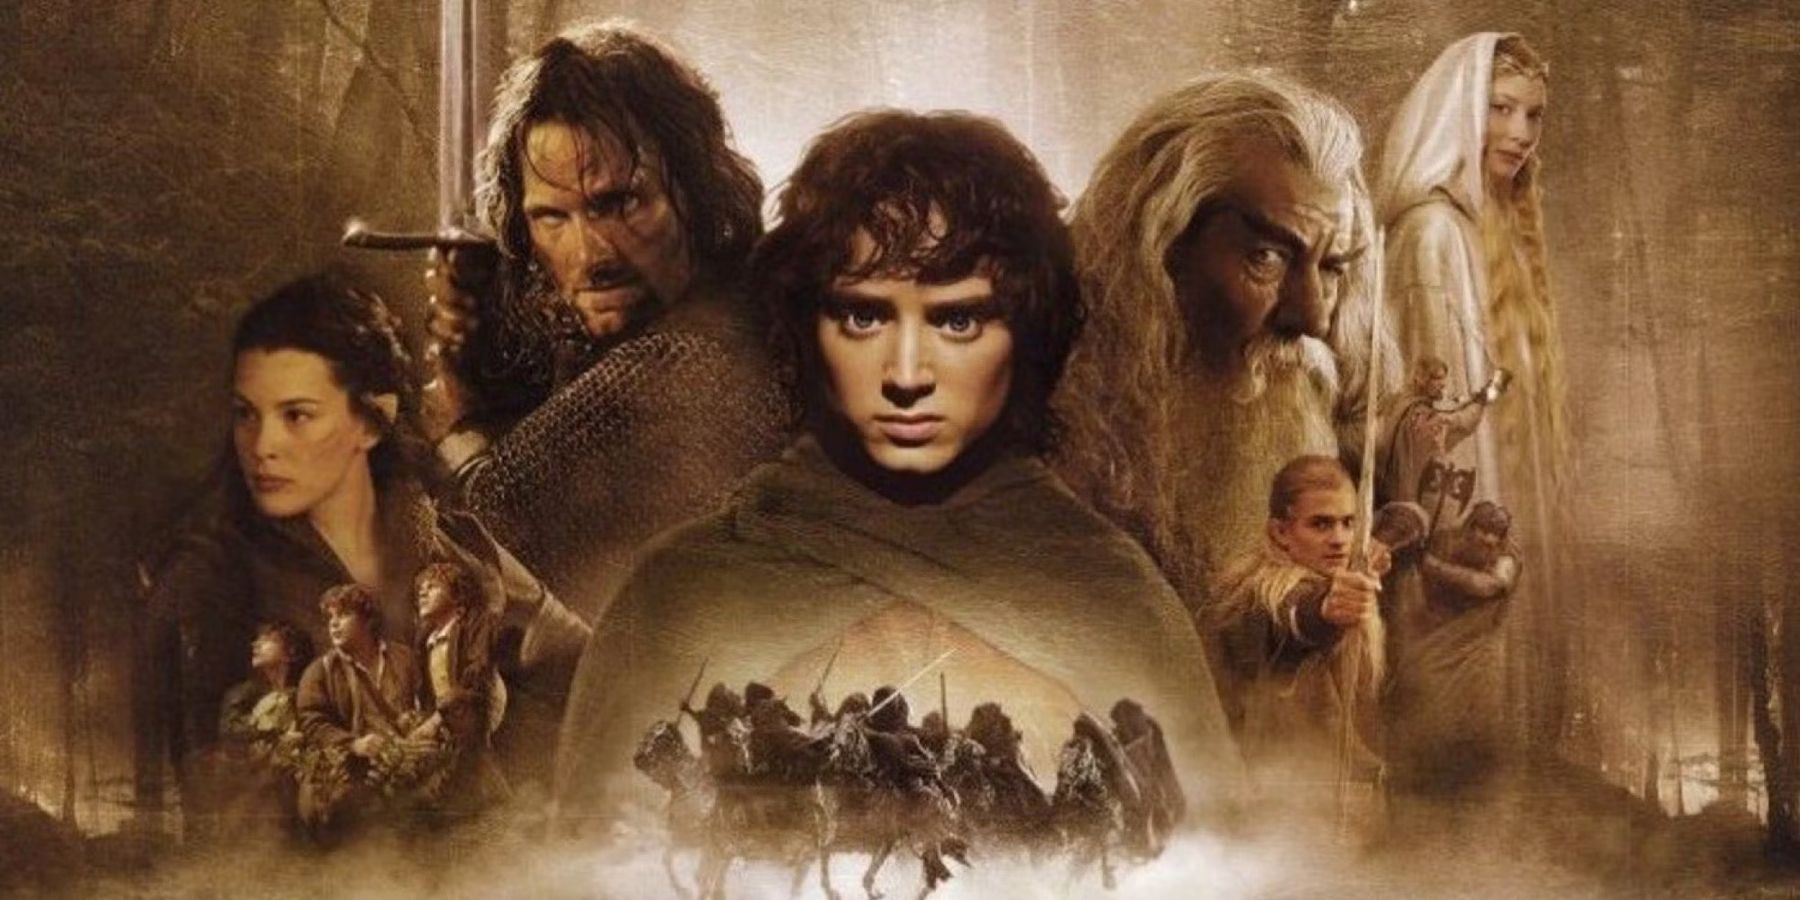 the lord of the rings fellowship of the ring movie